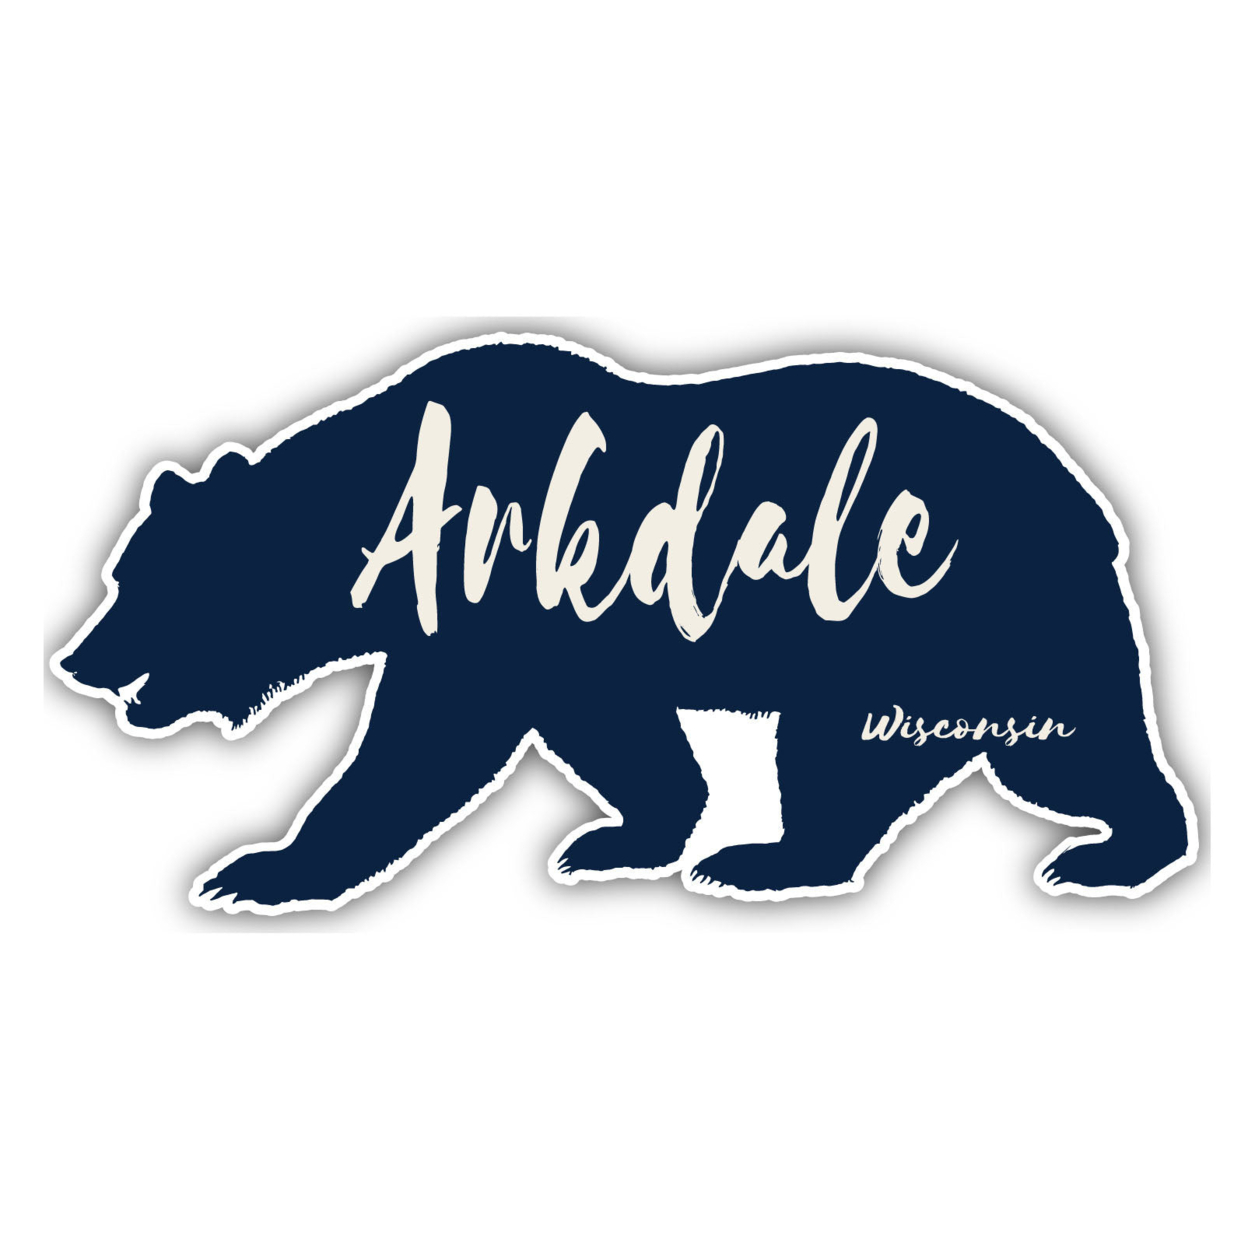 Arkdale Wisconsin Souvenir Decorative Stickers (Choose Theme And Size) - 4-Pack, 12-Inch, Tent